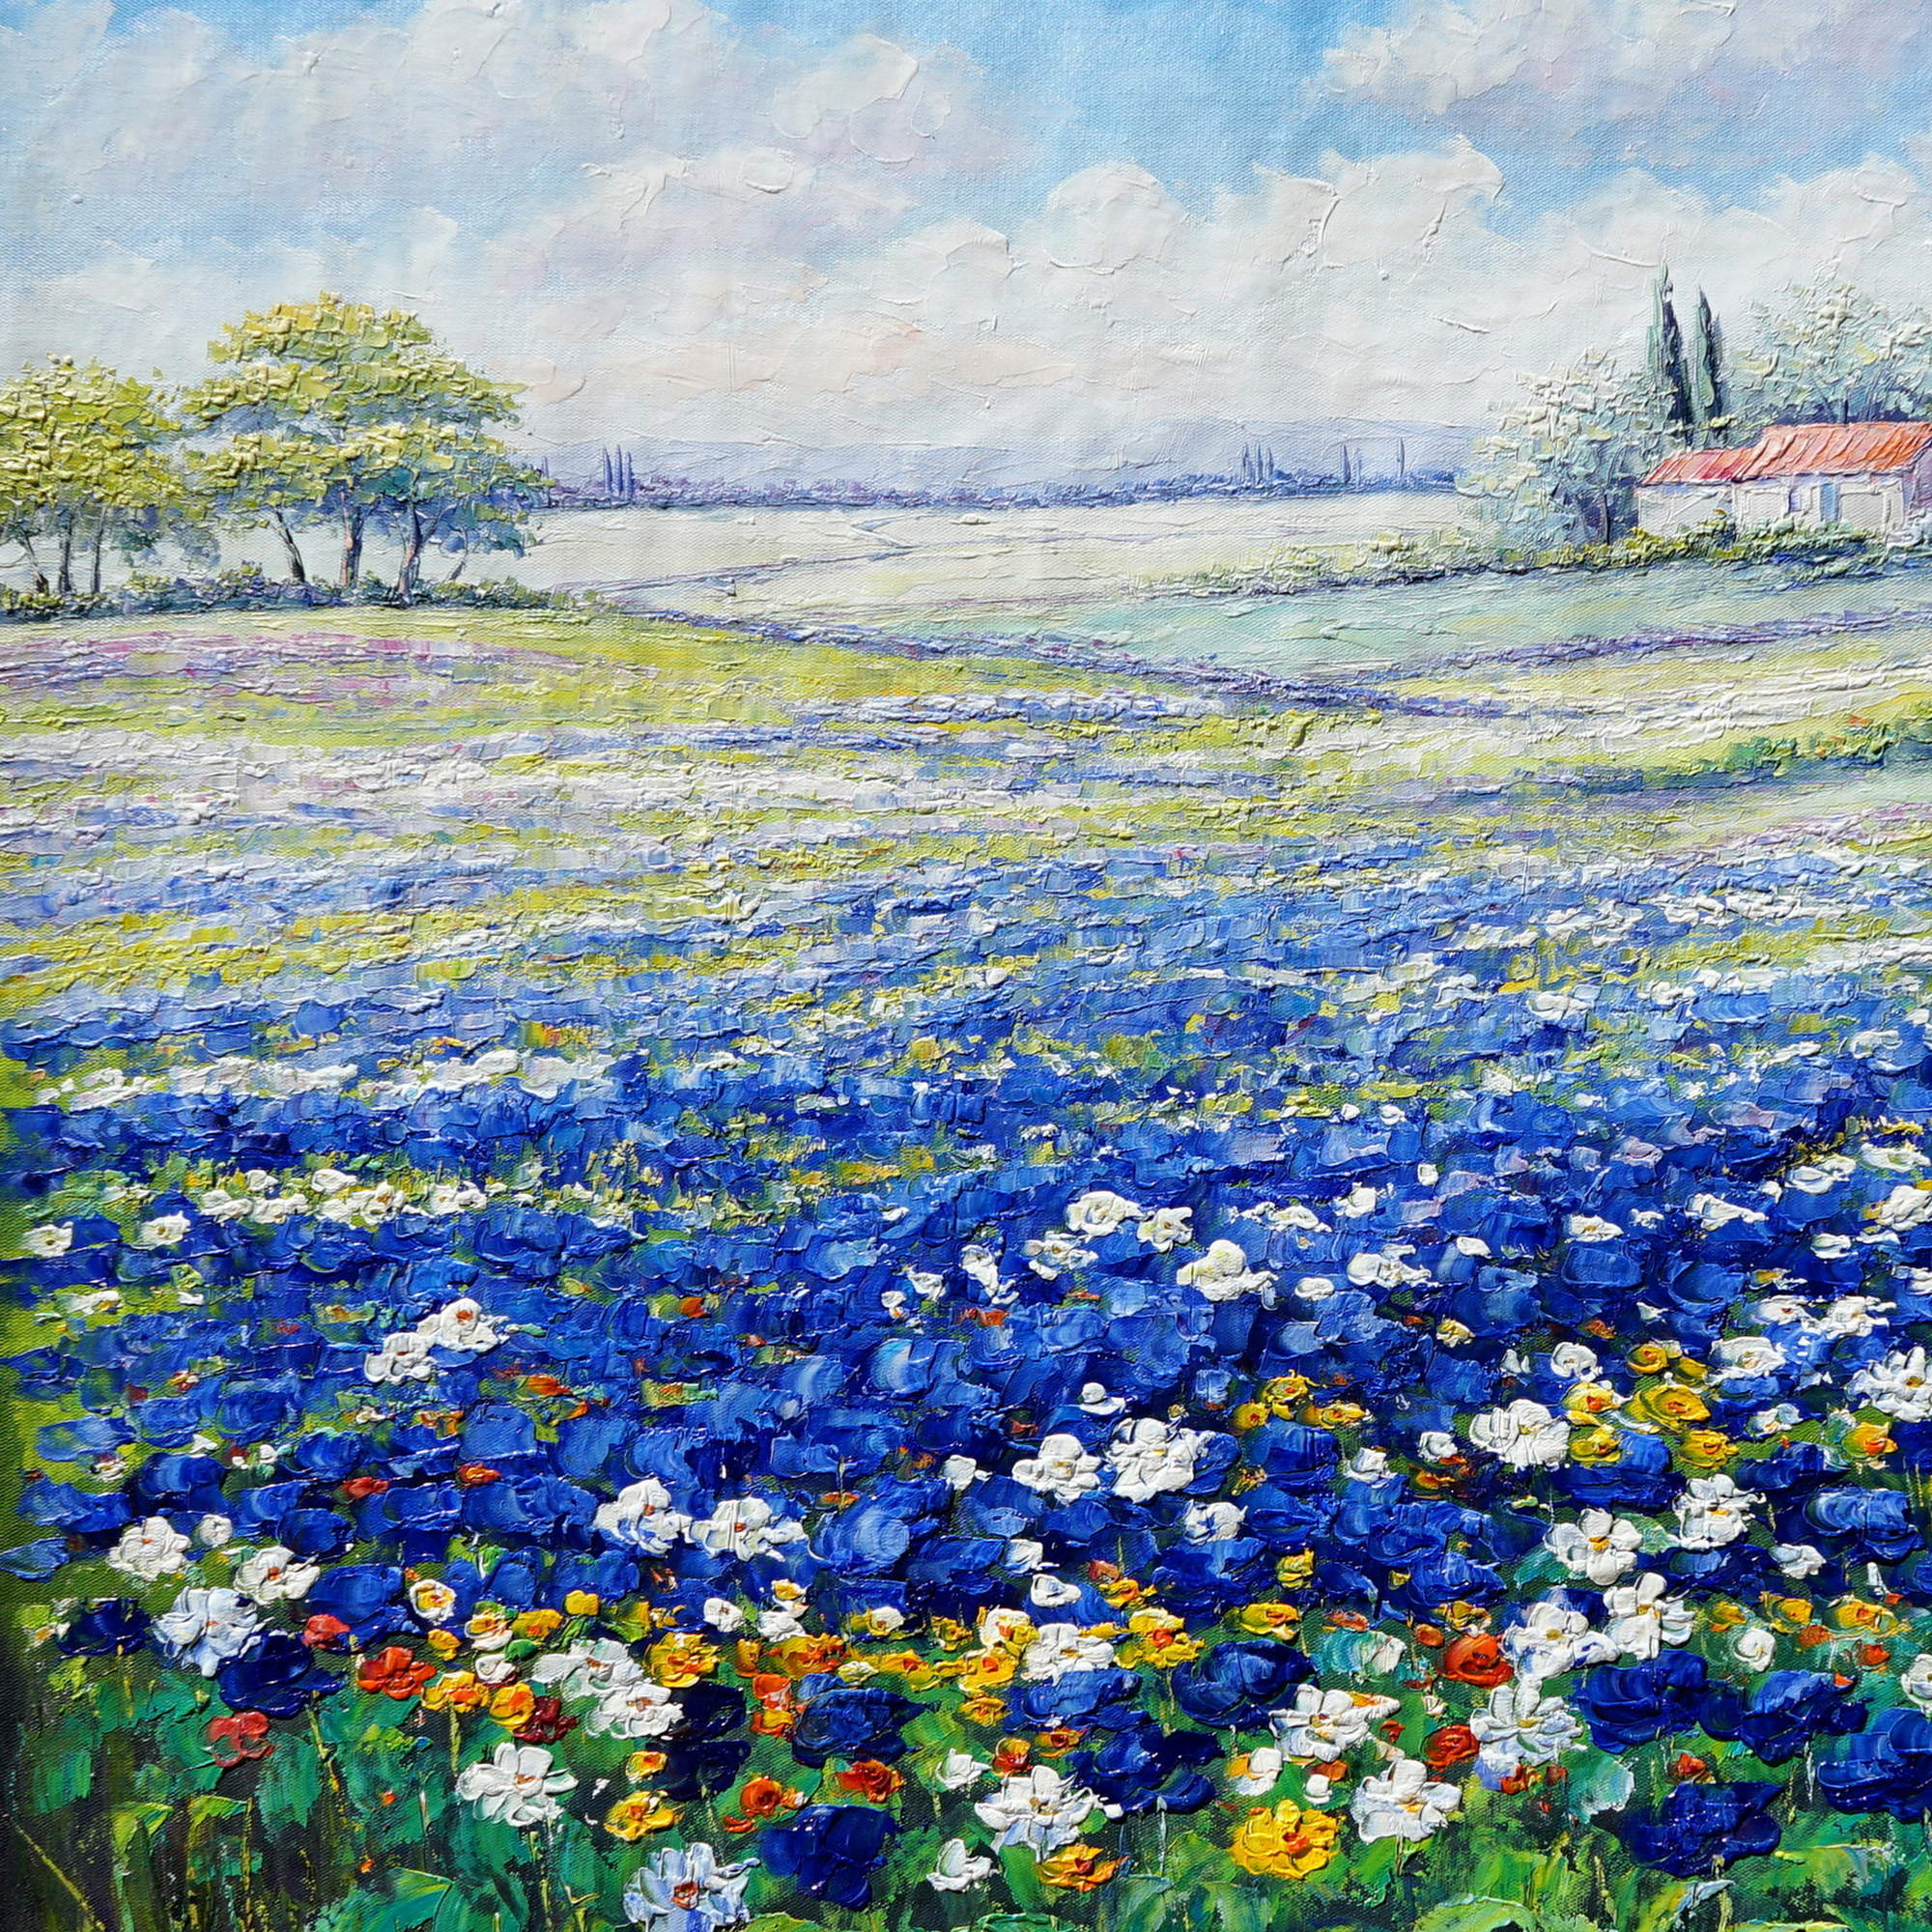 Hand painted Field of Flowers 75x100cm